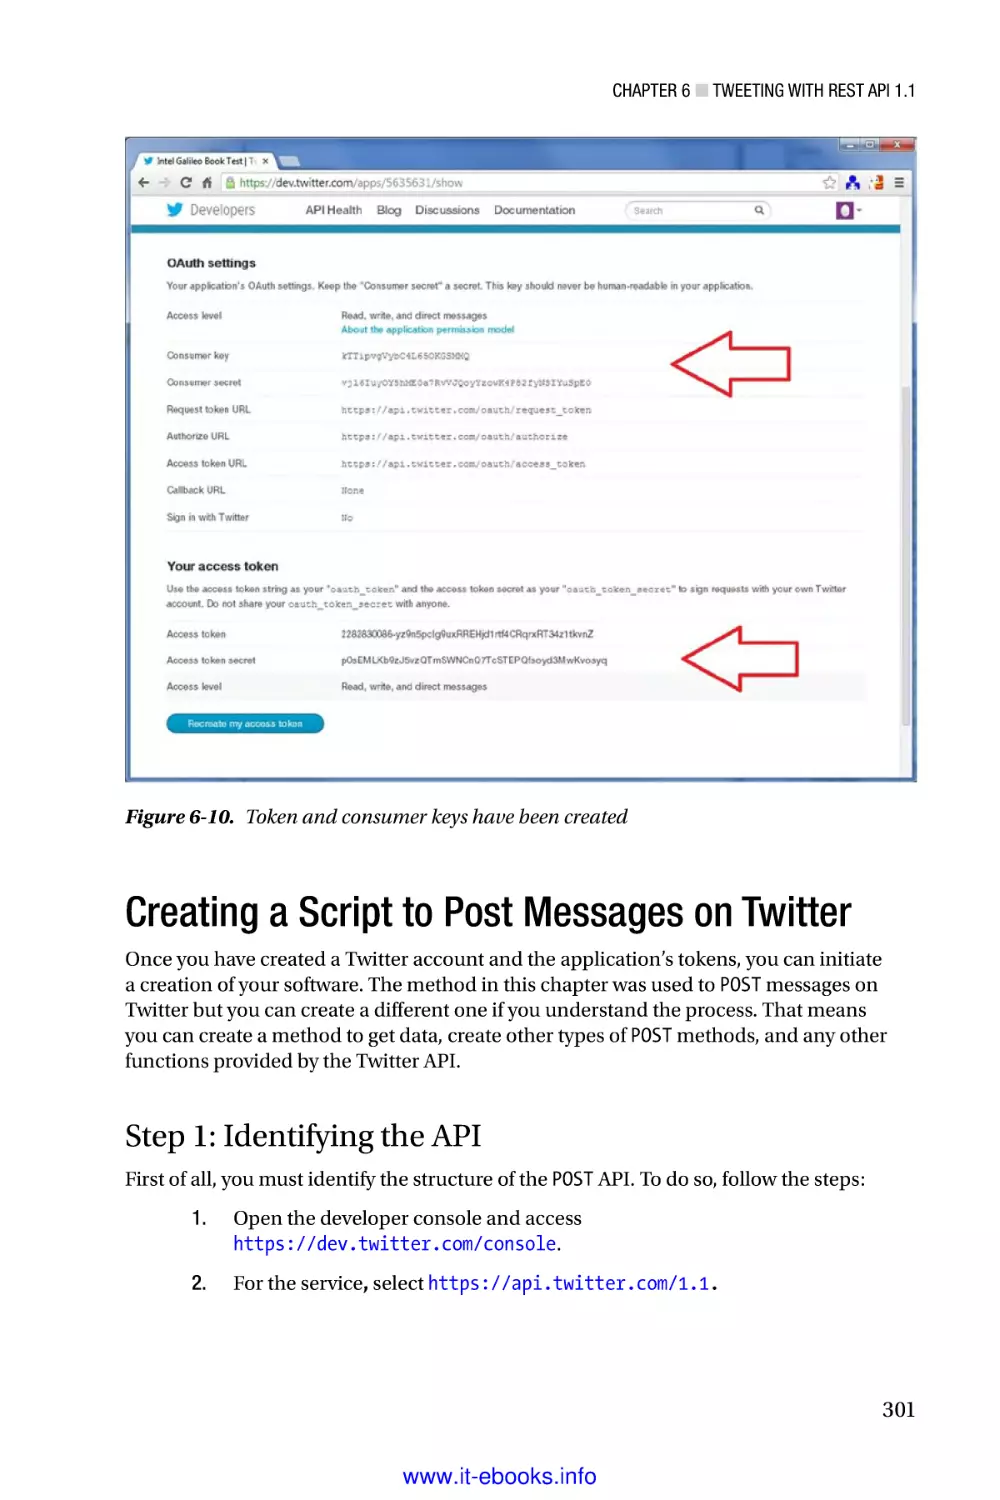 Creating a Script to Post Messages on Twitter
Step 1